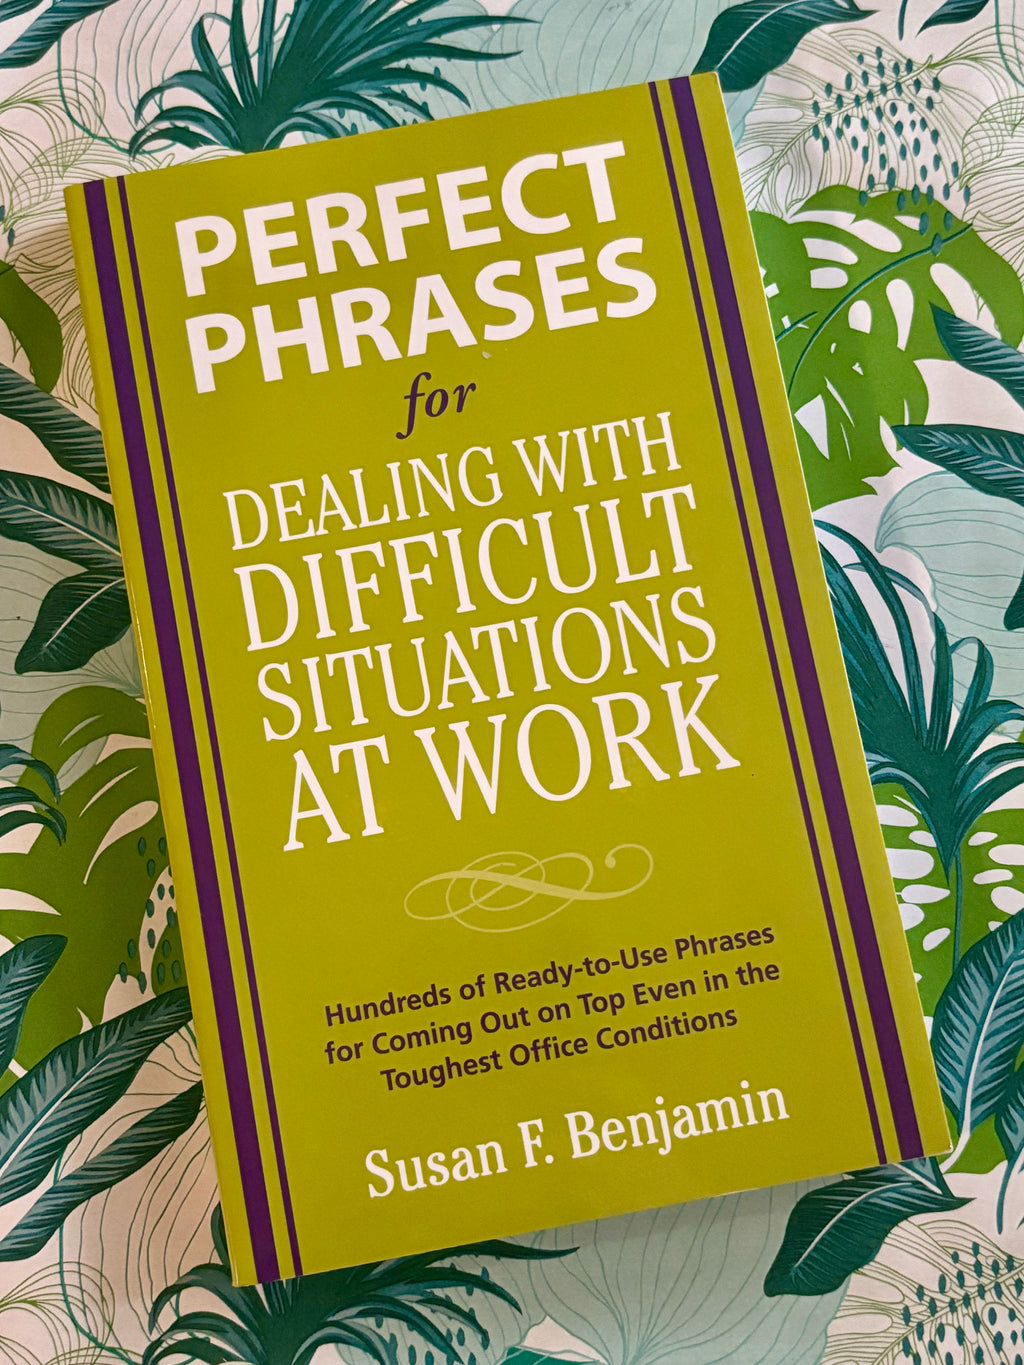 Perfect Phrases for Dealing with Difficult Situations at Work- By Susan F. Benjamin